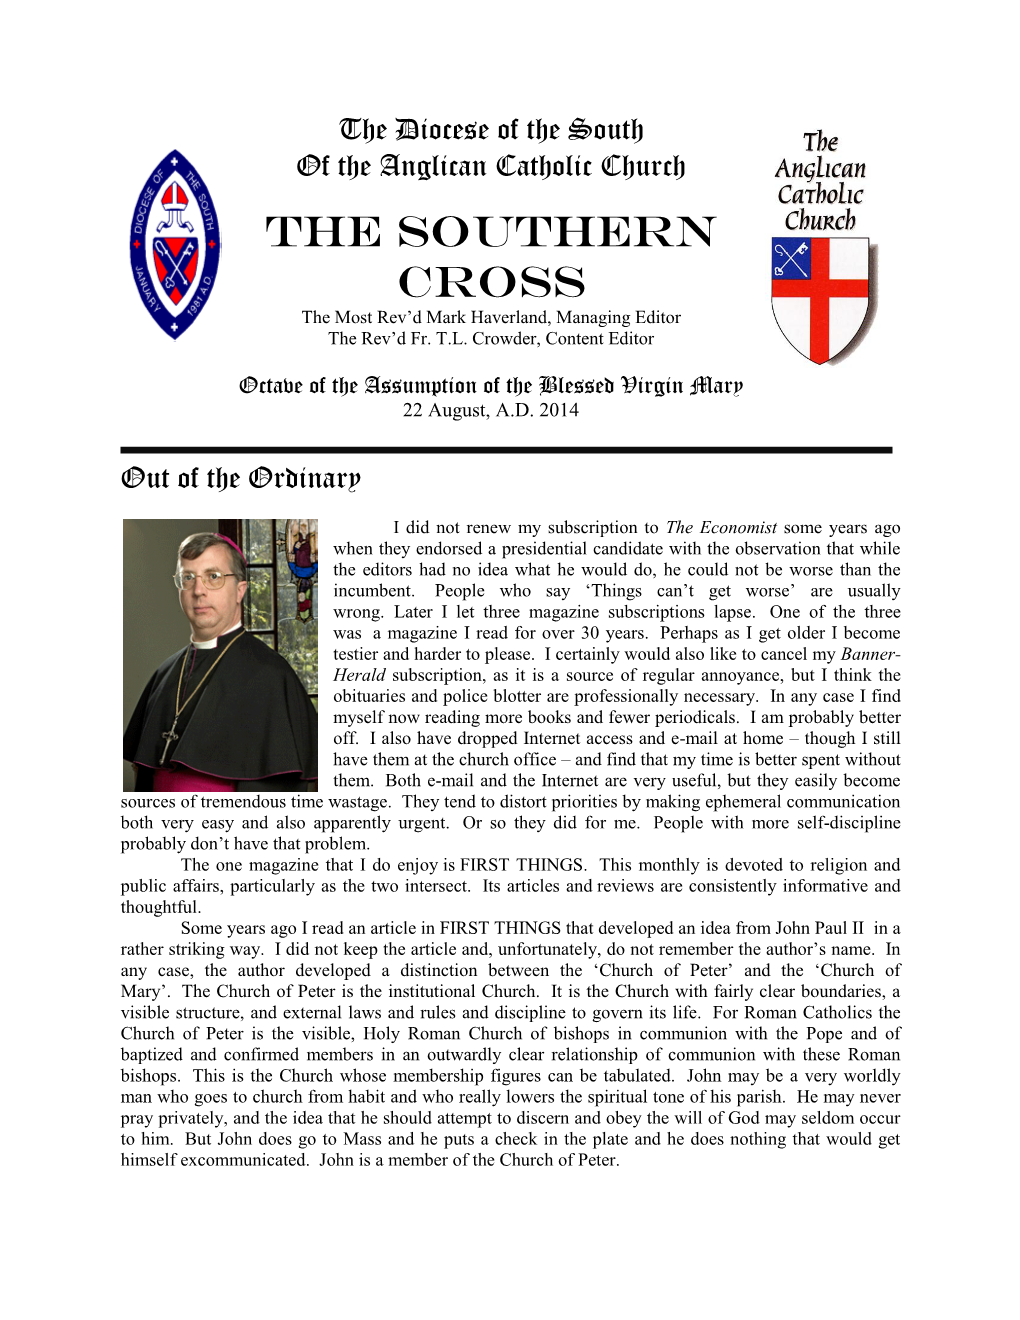 The SOUTHERN CROSS the Most Rev’D Mark Haverland, Managing Editor the Rev’D Fr